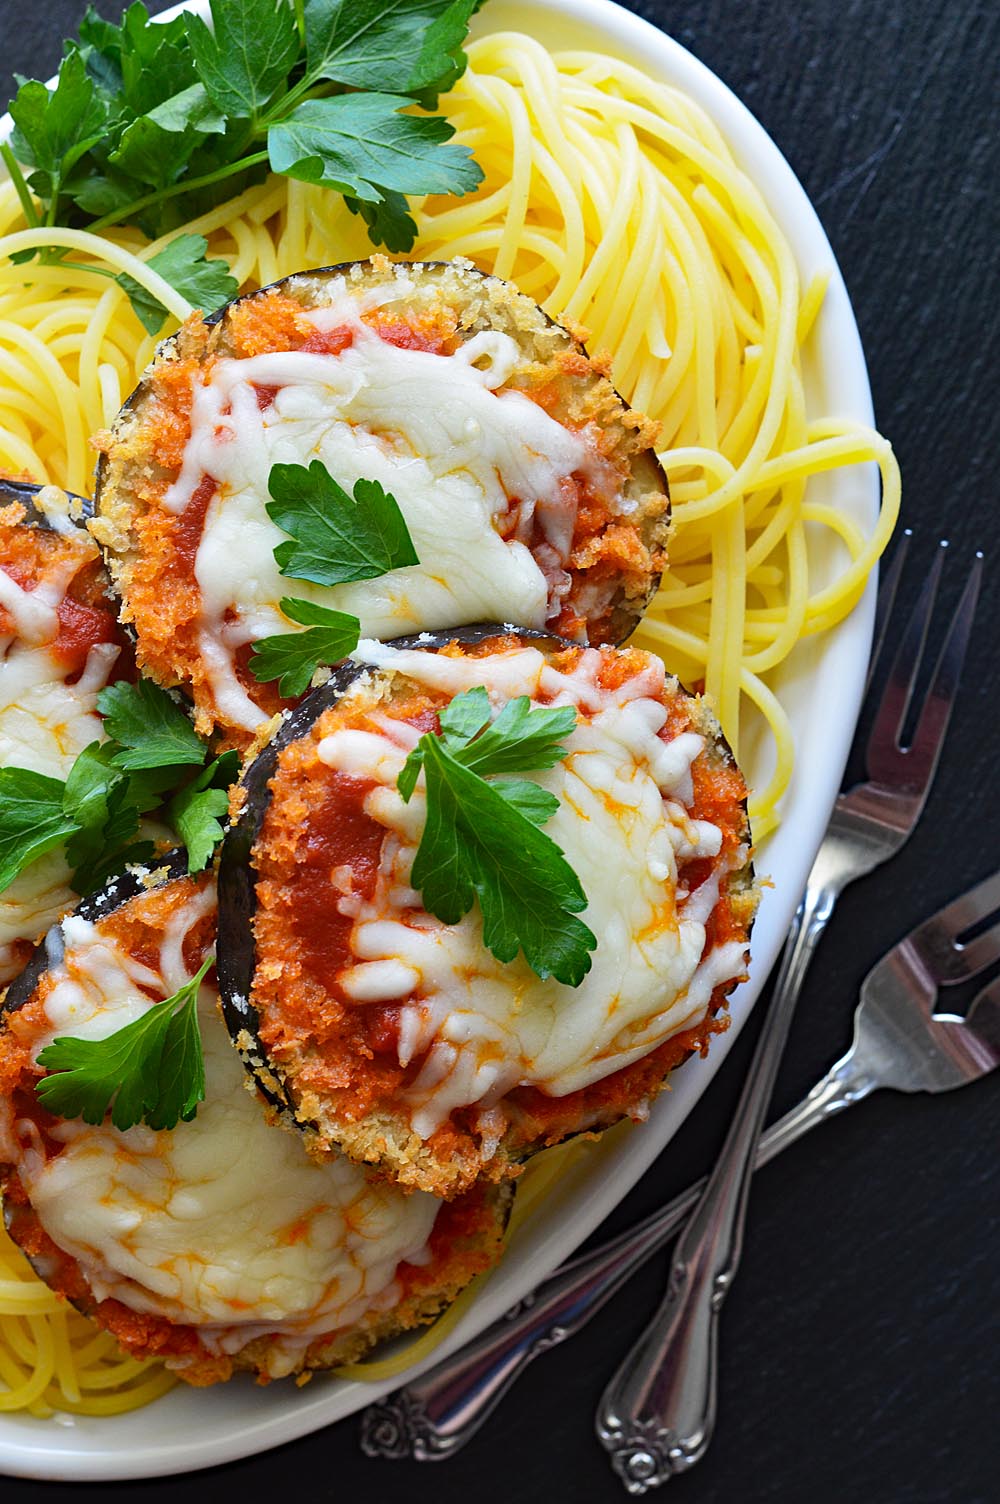 Overhead view of vegan air fryer eggplant parmesan with spaghetti